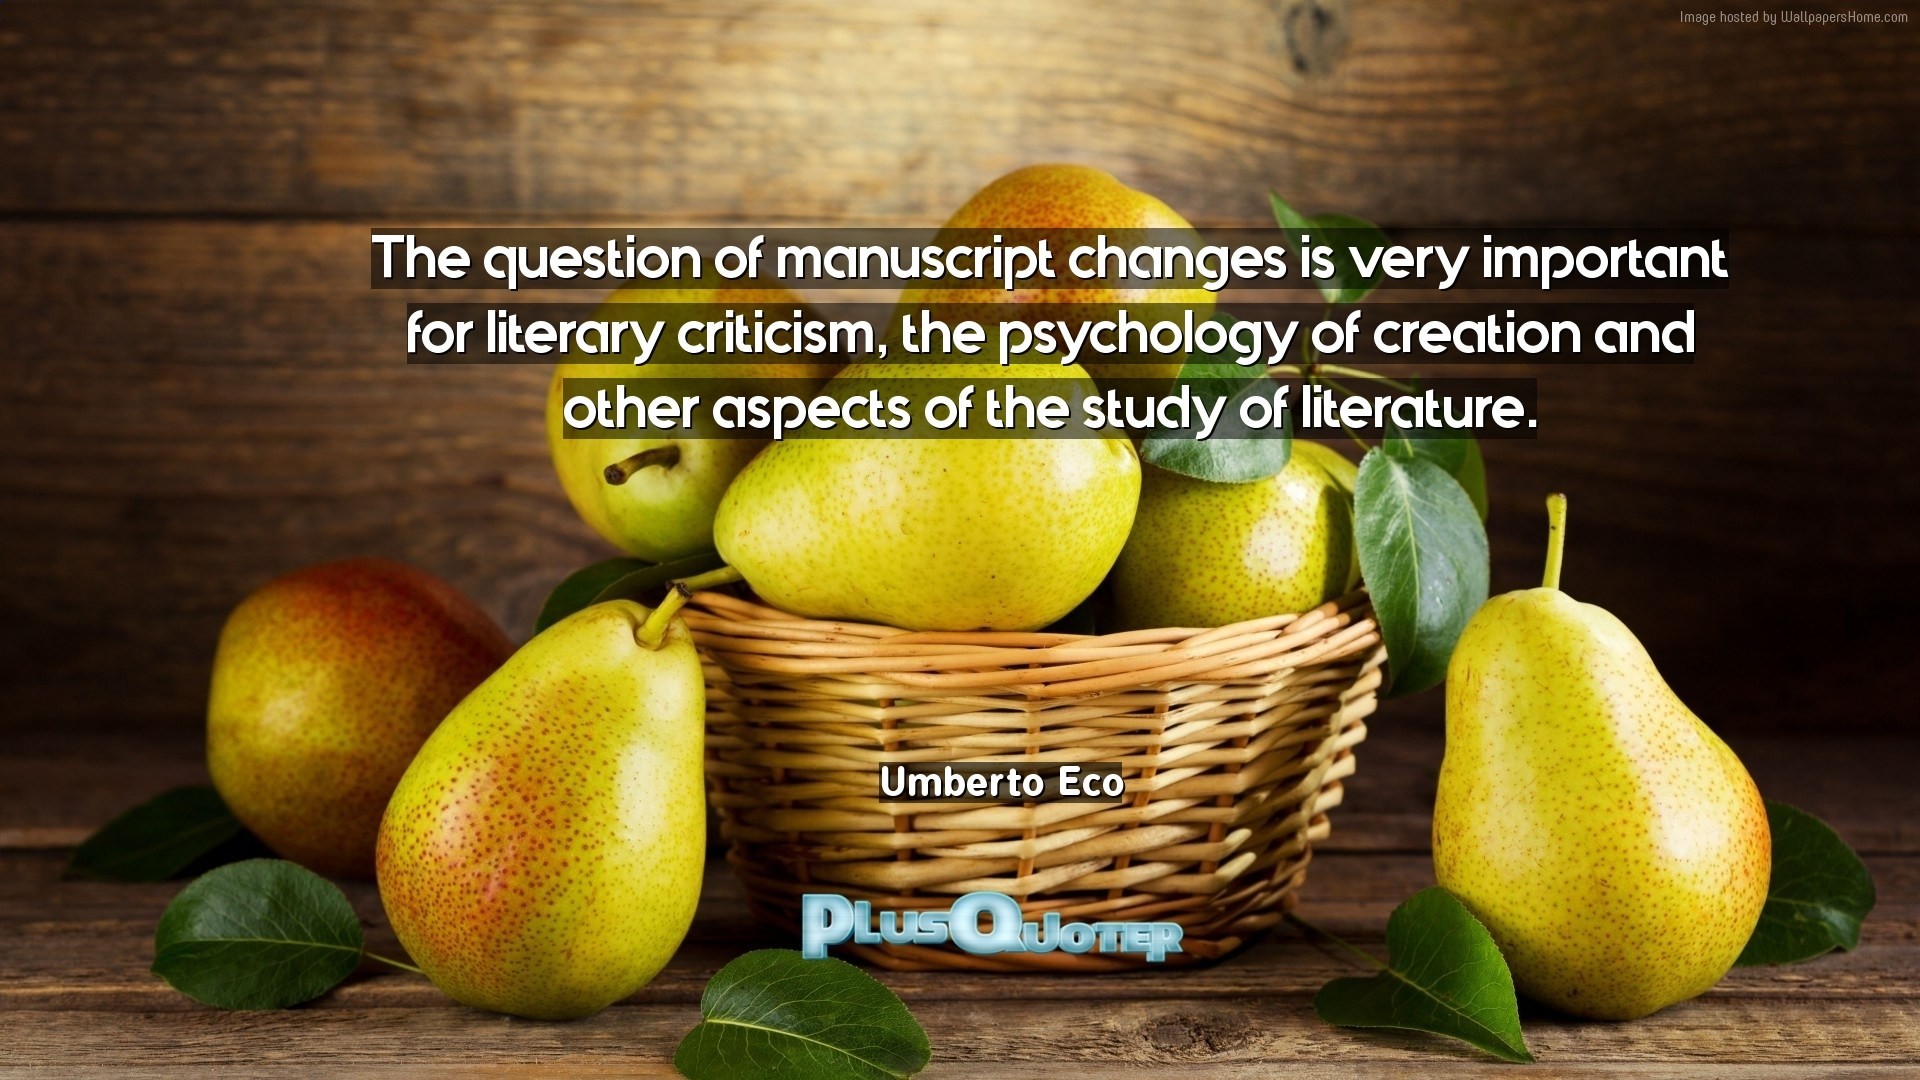 1920x1080 Download Wallpaper with inspirational Quotes- "The question of manuscript  changes is very important for. “